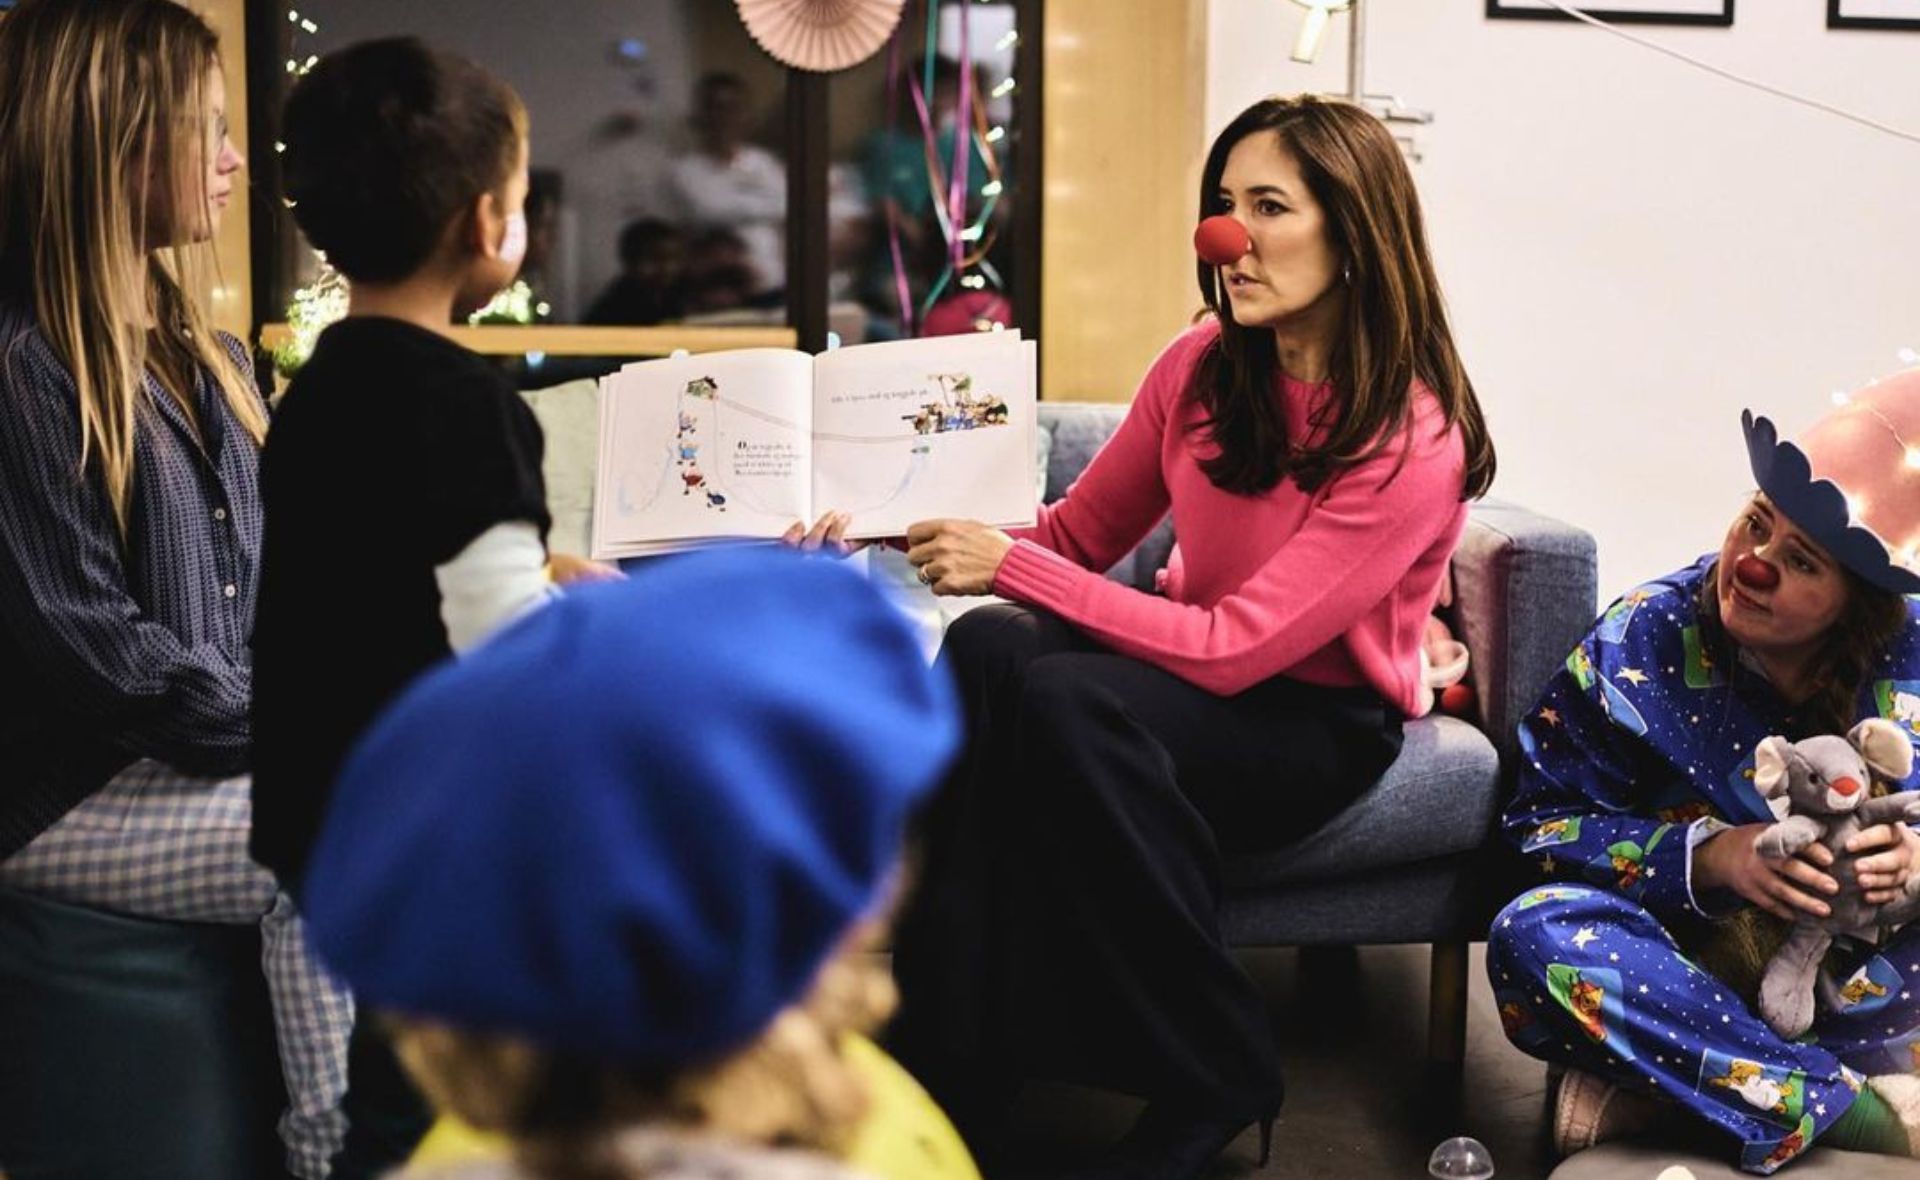 Crown Princess Mary shares a “goodnight story” as she pays special visit to a children’s hospital